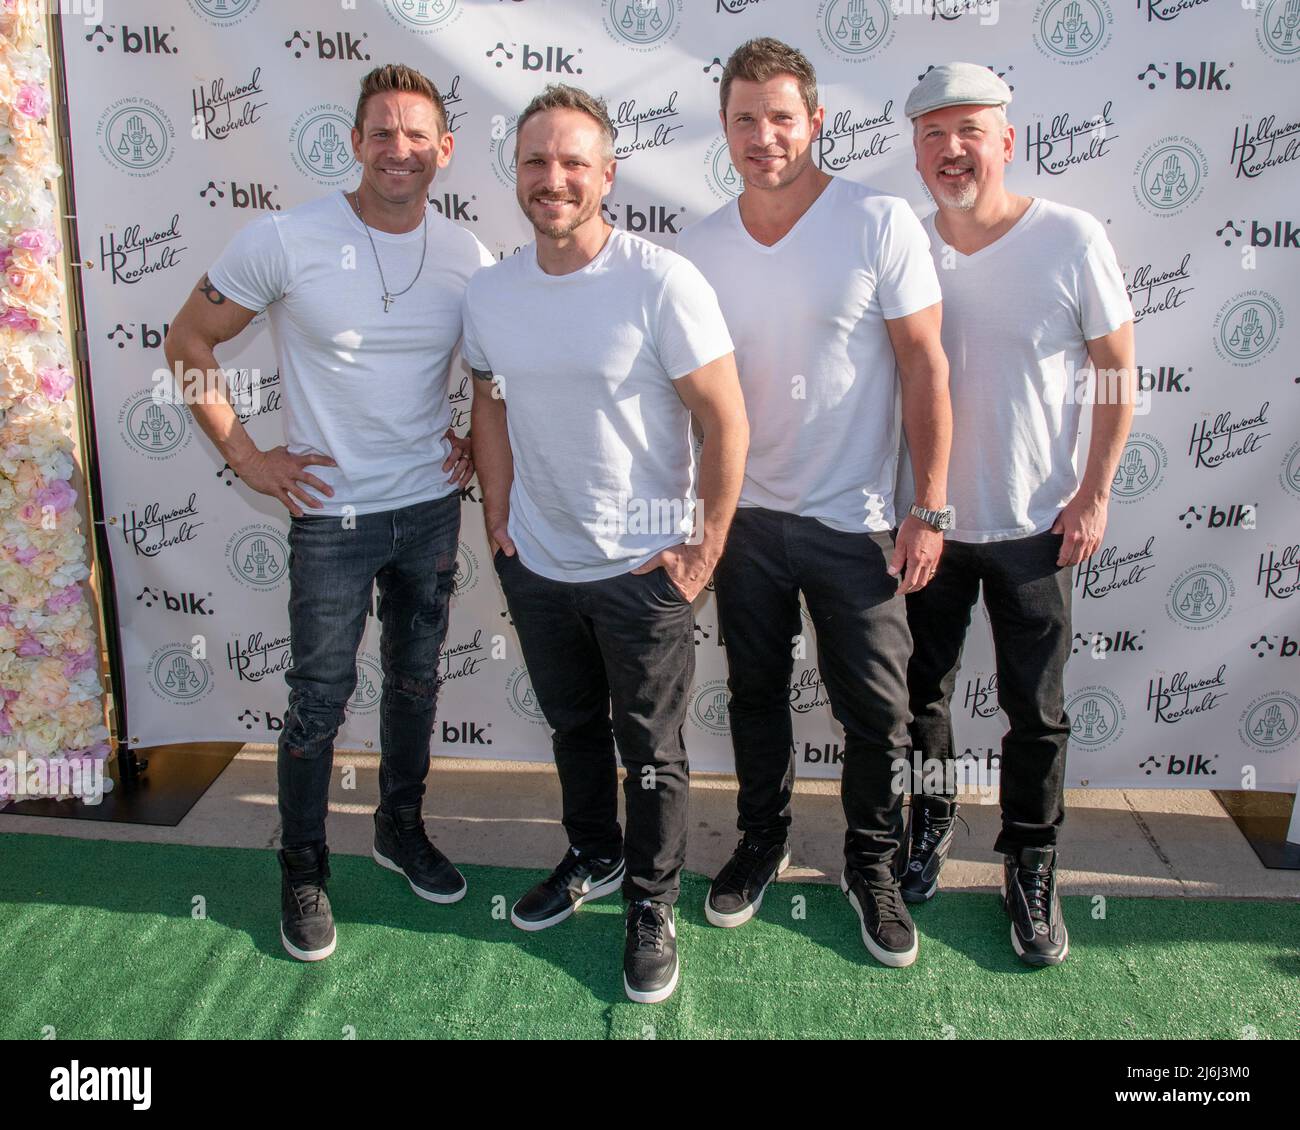 From left to right) Nick Lachey, Drew Lachey, Jeff Timmons, and